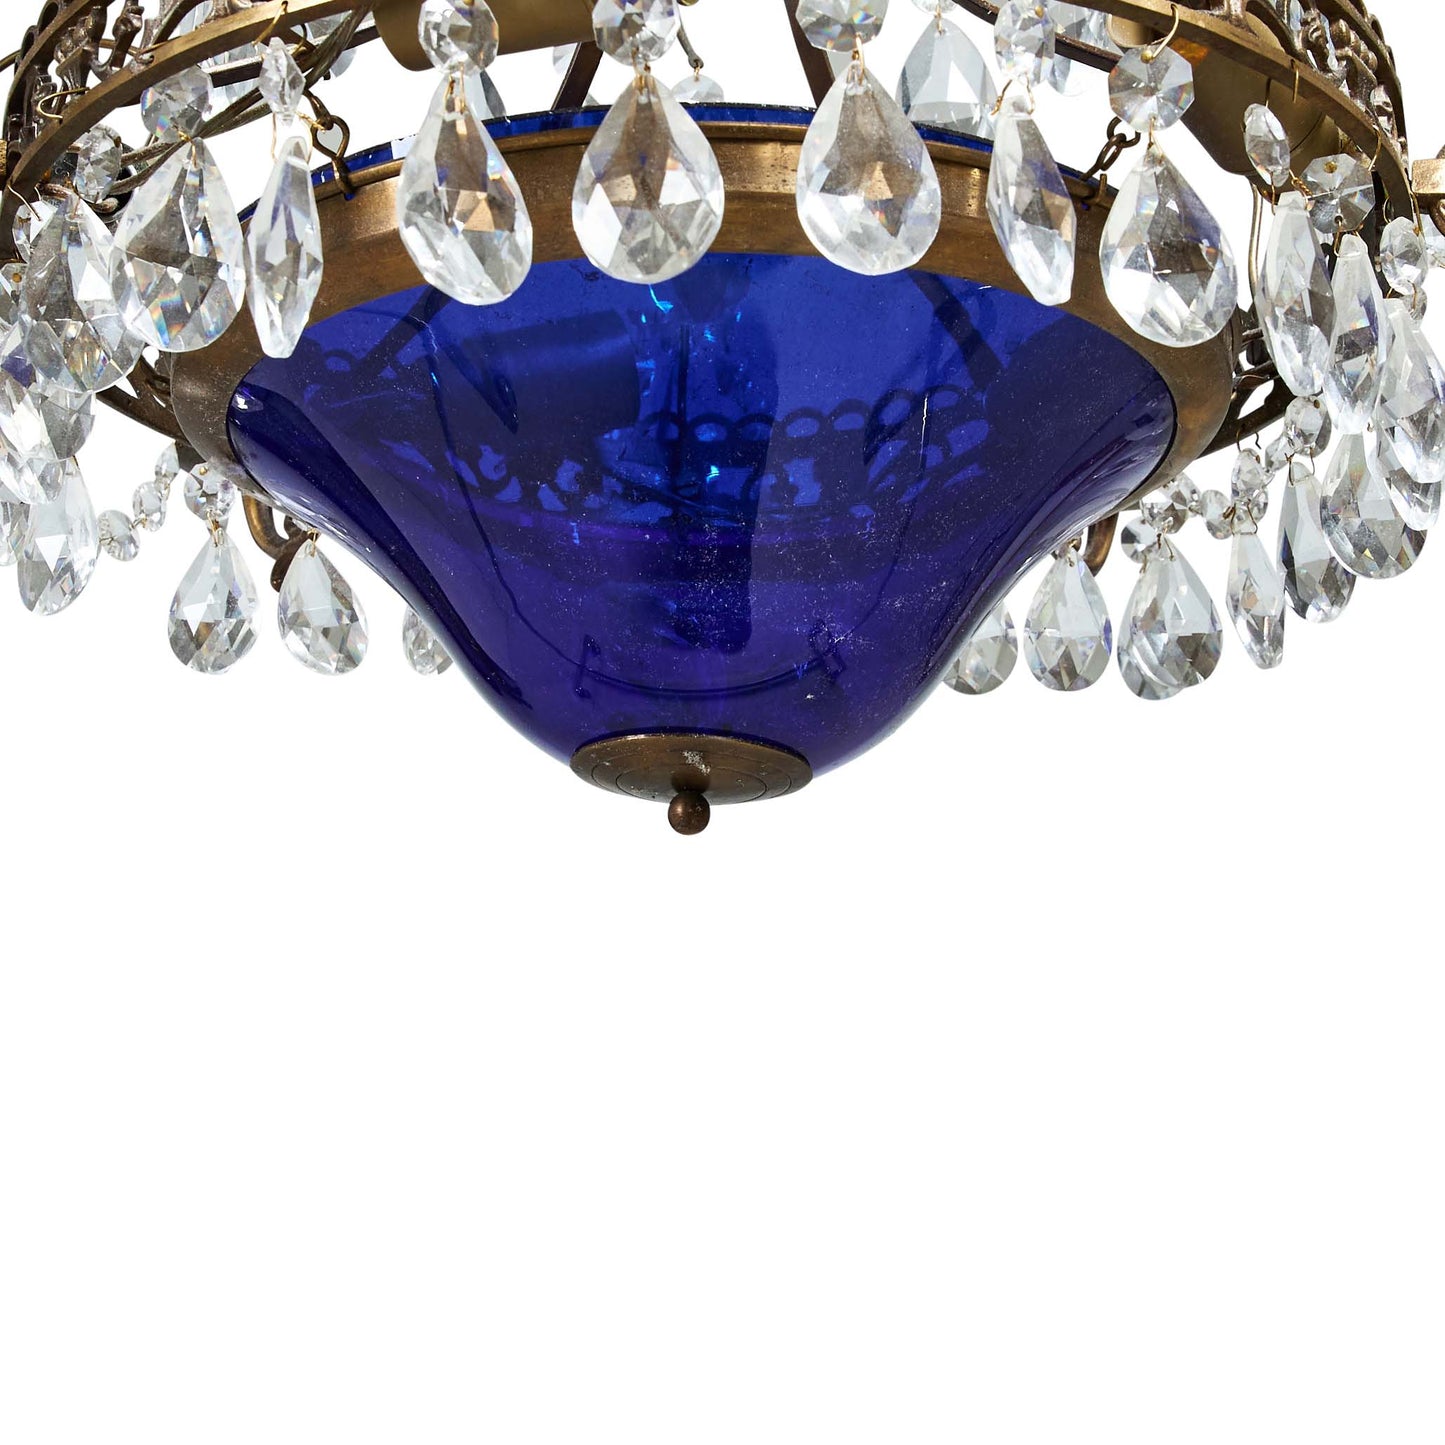 Antique 4 Arm Crystal Empire Chandelier with Blue glass bowl 1900's